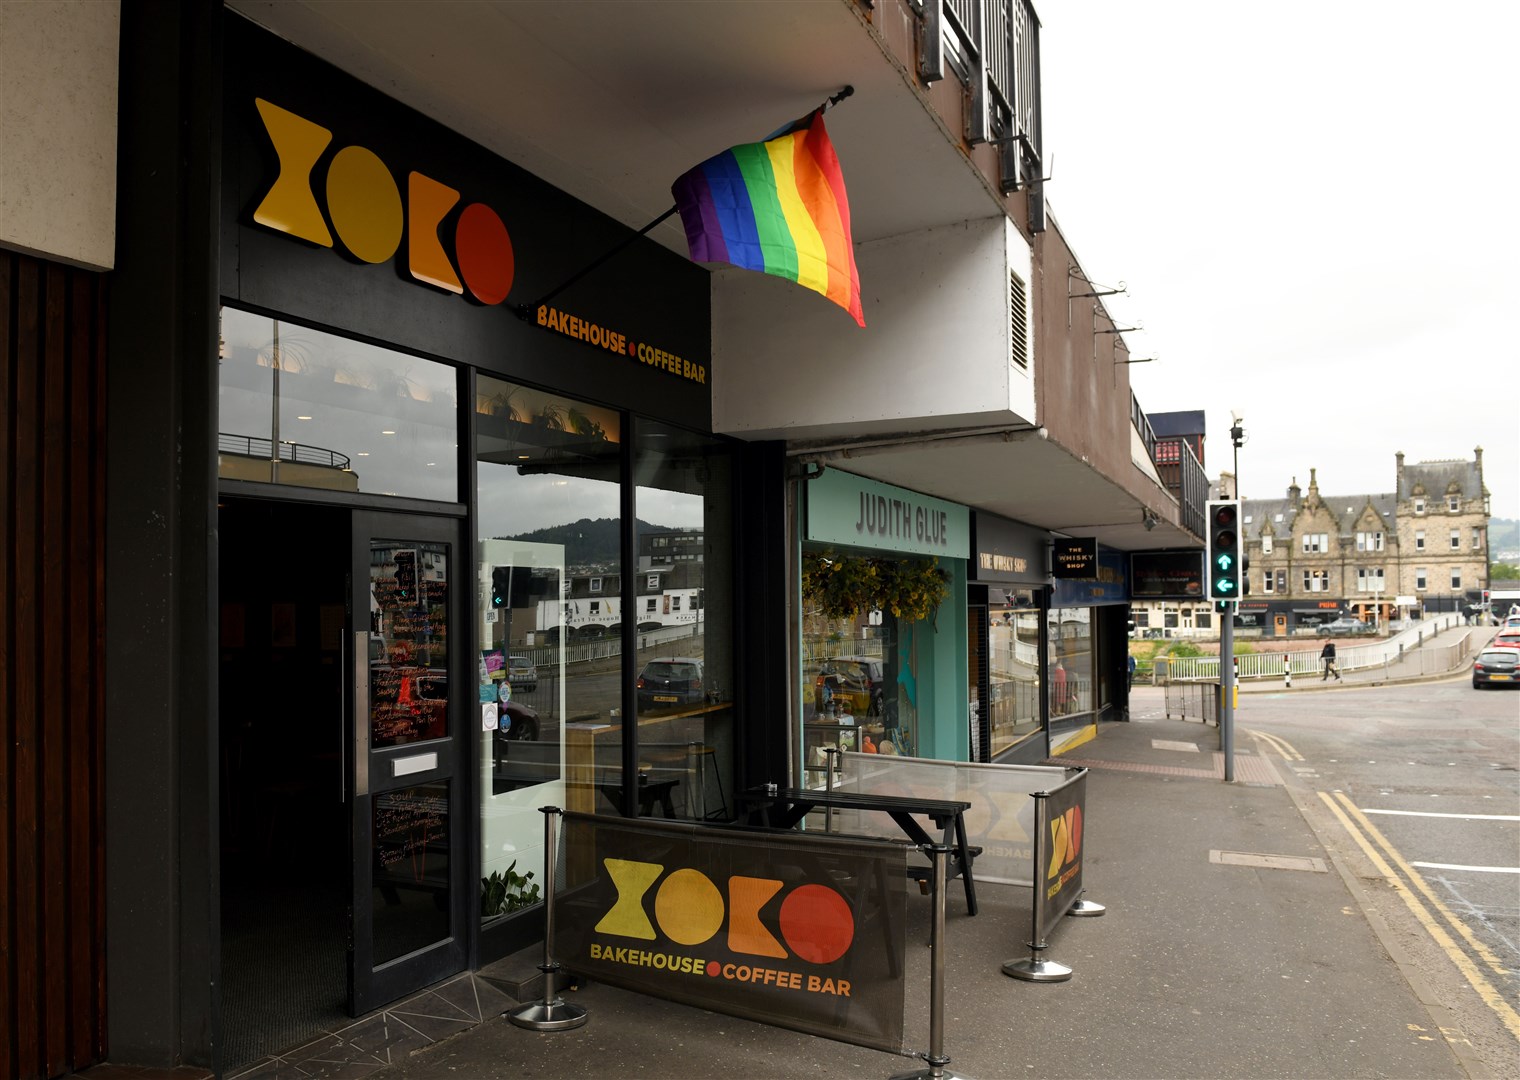 Xoko Bakehouse has had its Pride flag ripped down. Picture: James Mackenzie.